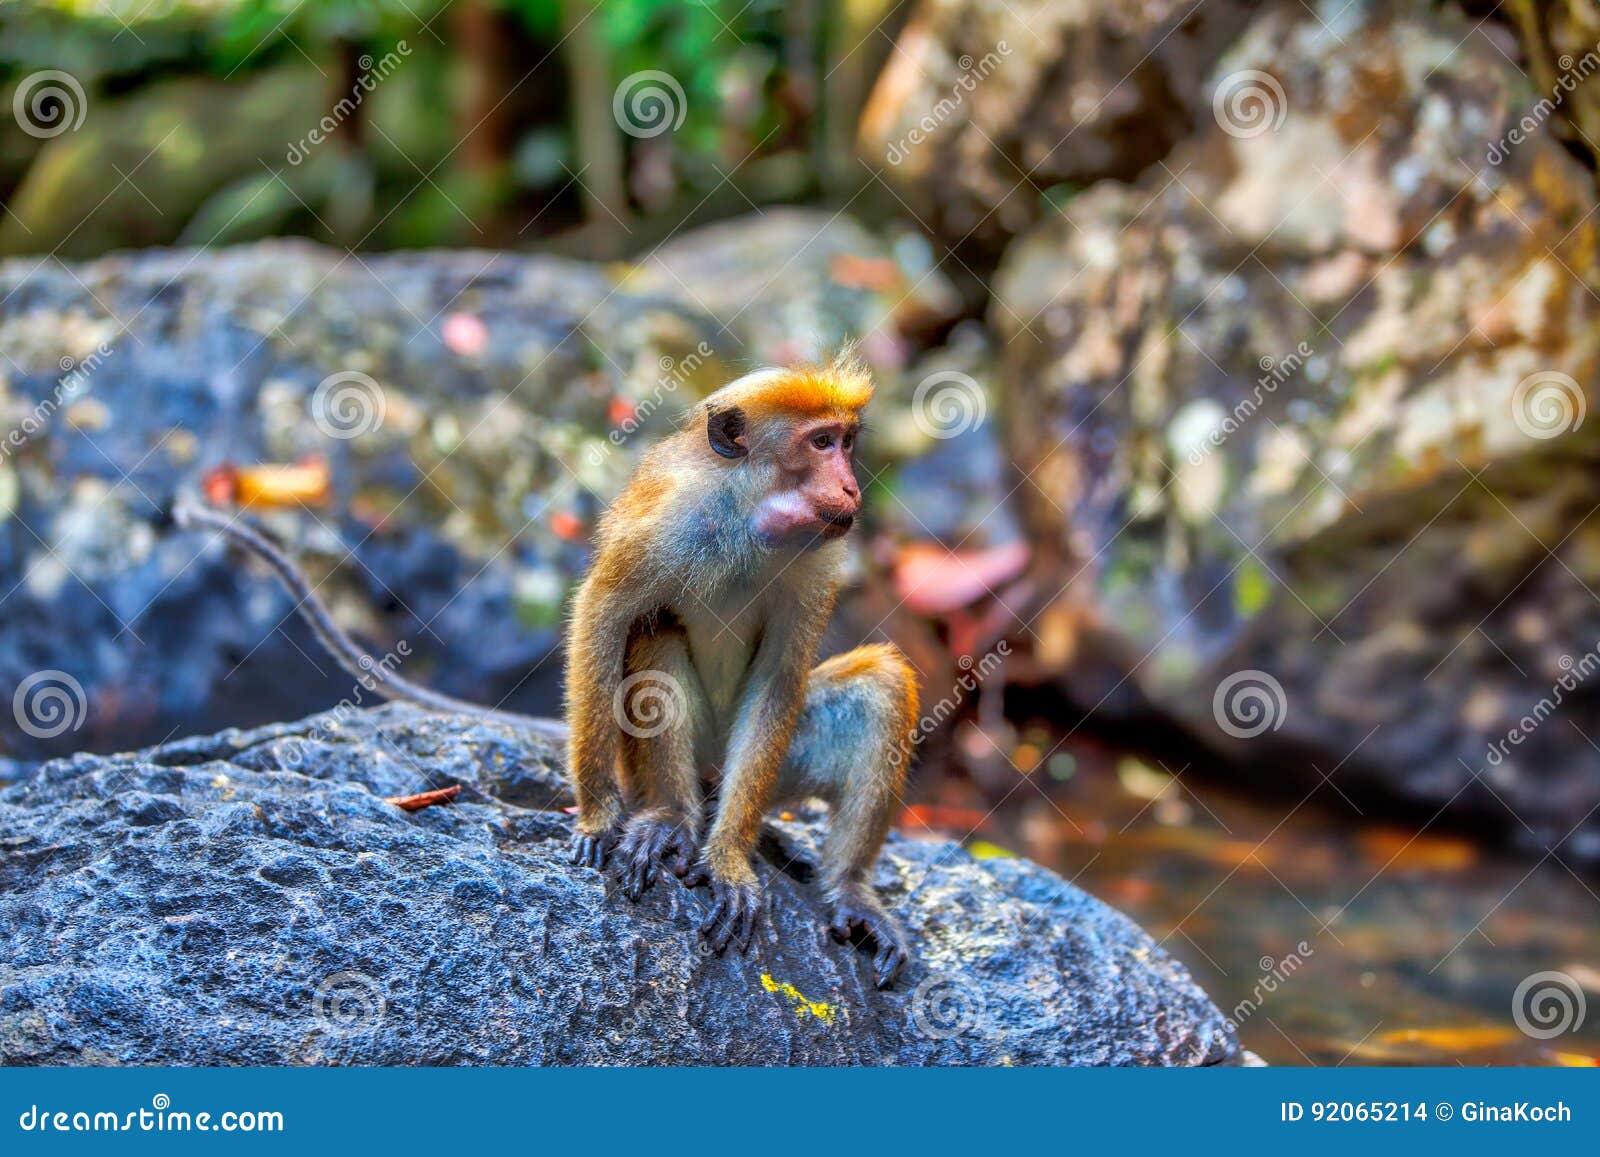 little wilde green monkeys or guenons characterize the landscape of the rainforests